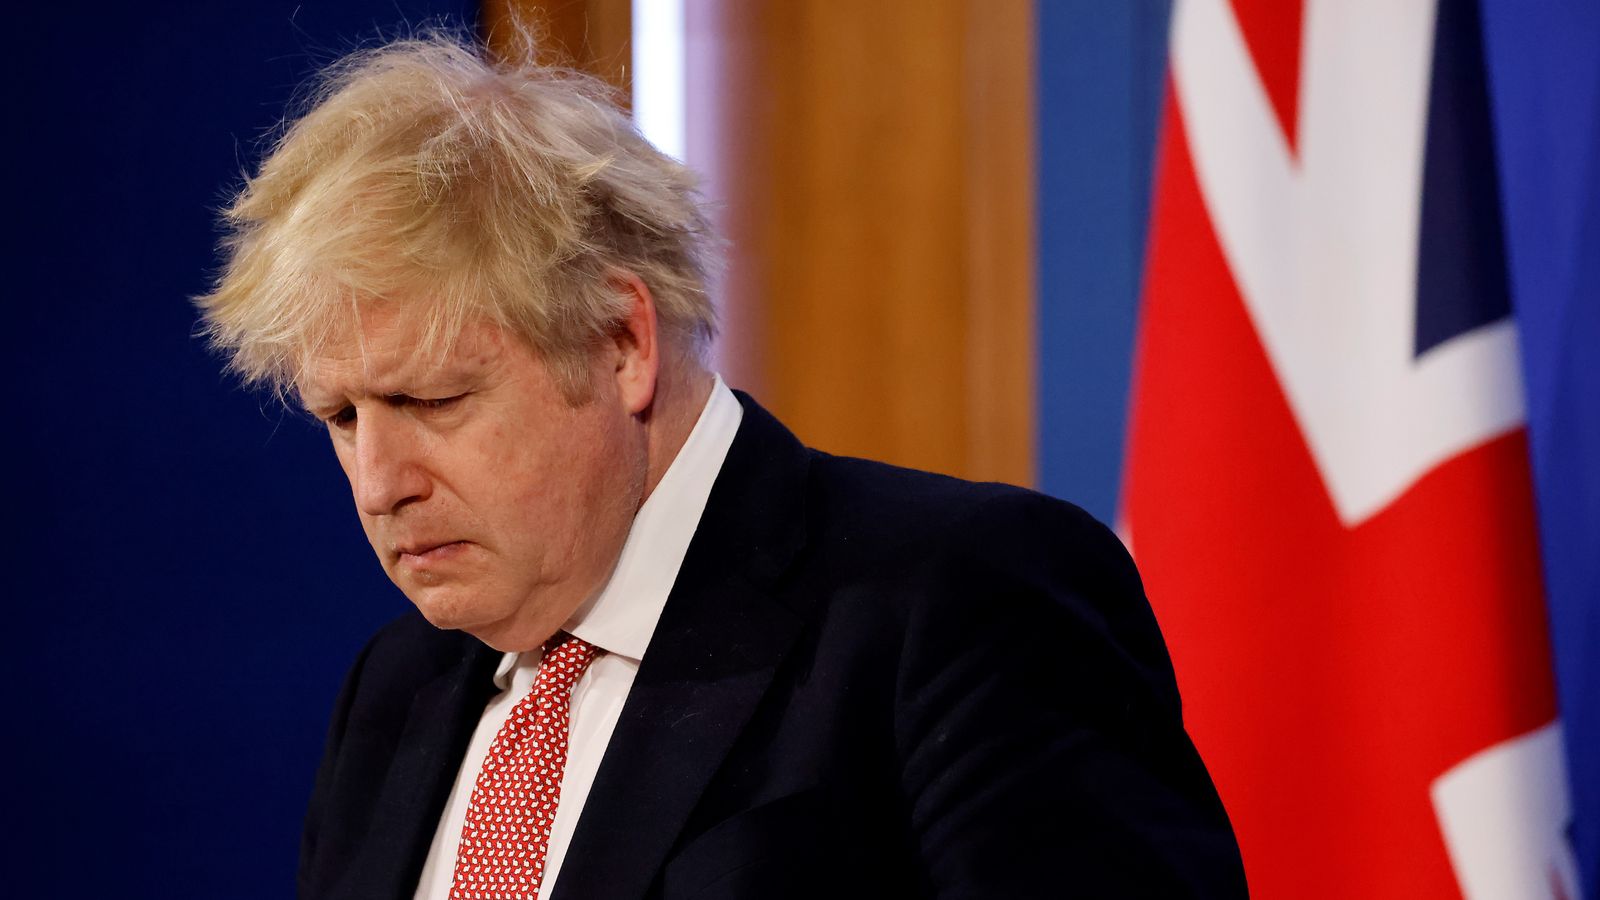 Boris Johnson set to back Matt Hancock and apologise for COVID complacency - report